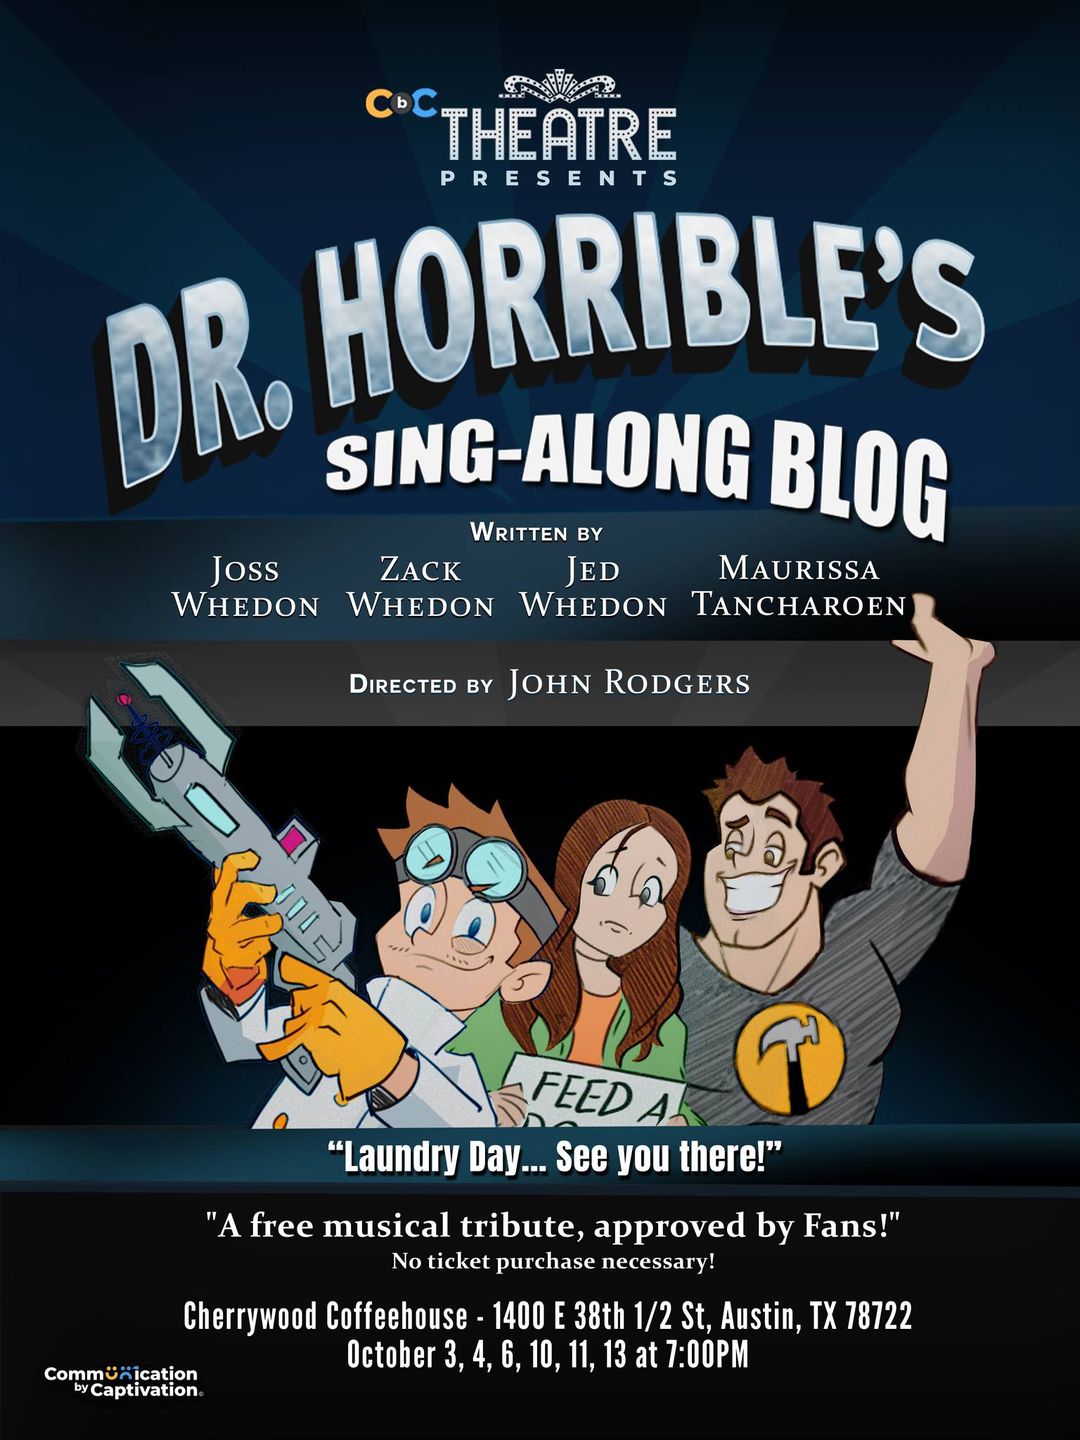 Dr. Horrible's Sing-along Blog by Communication by Captivation